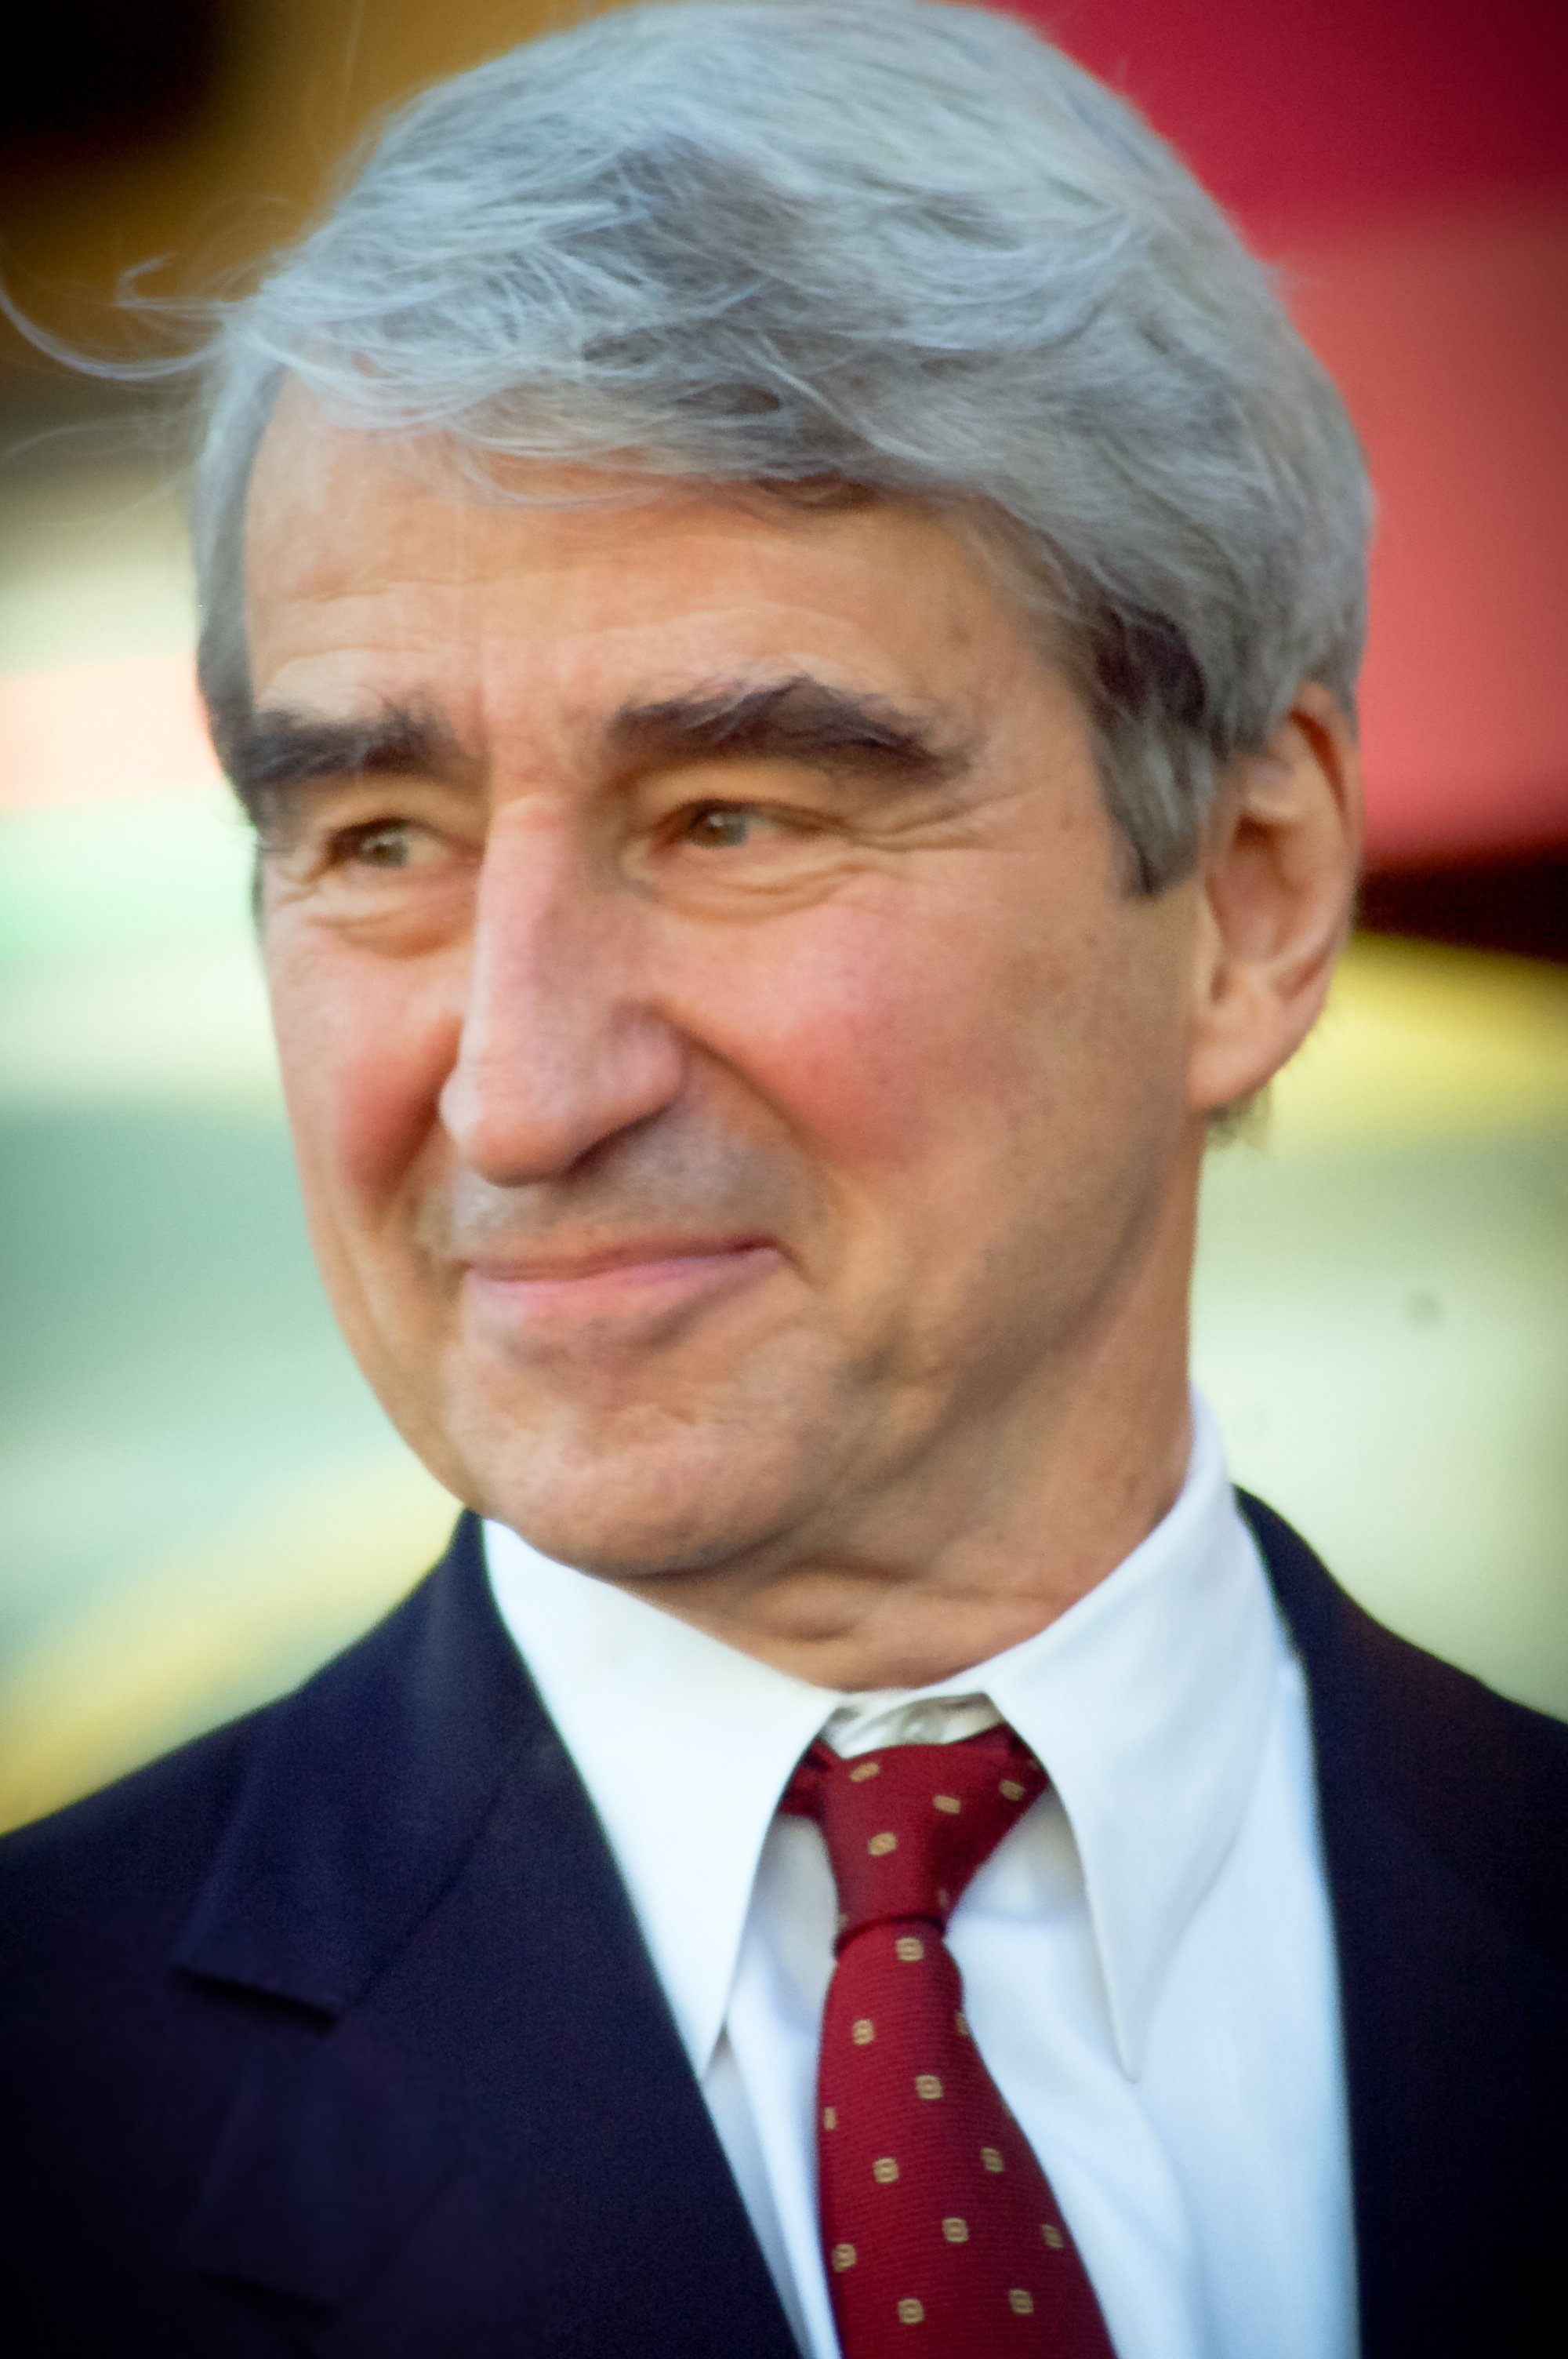 Sam Waterston at a ceremony in January 2010 to receive a star on the Hollywood Walk of Fame. | Photo: Getty Images